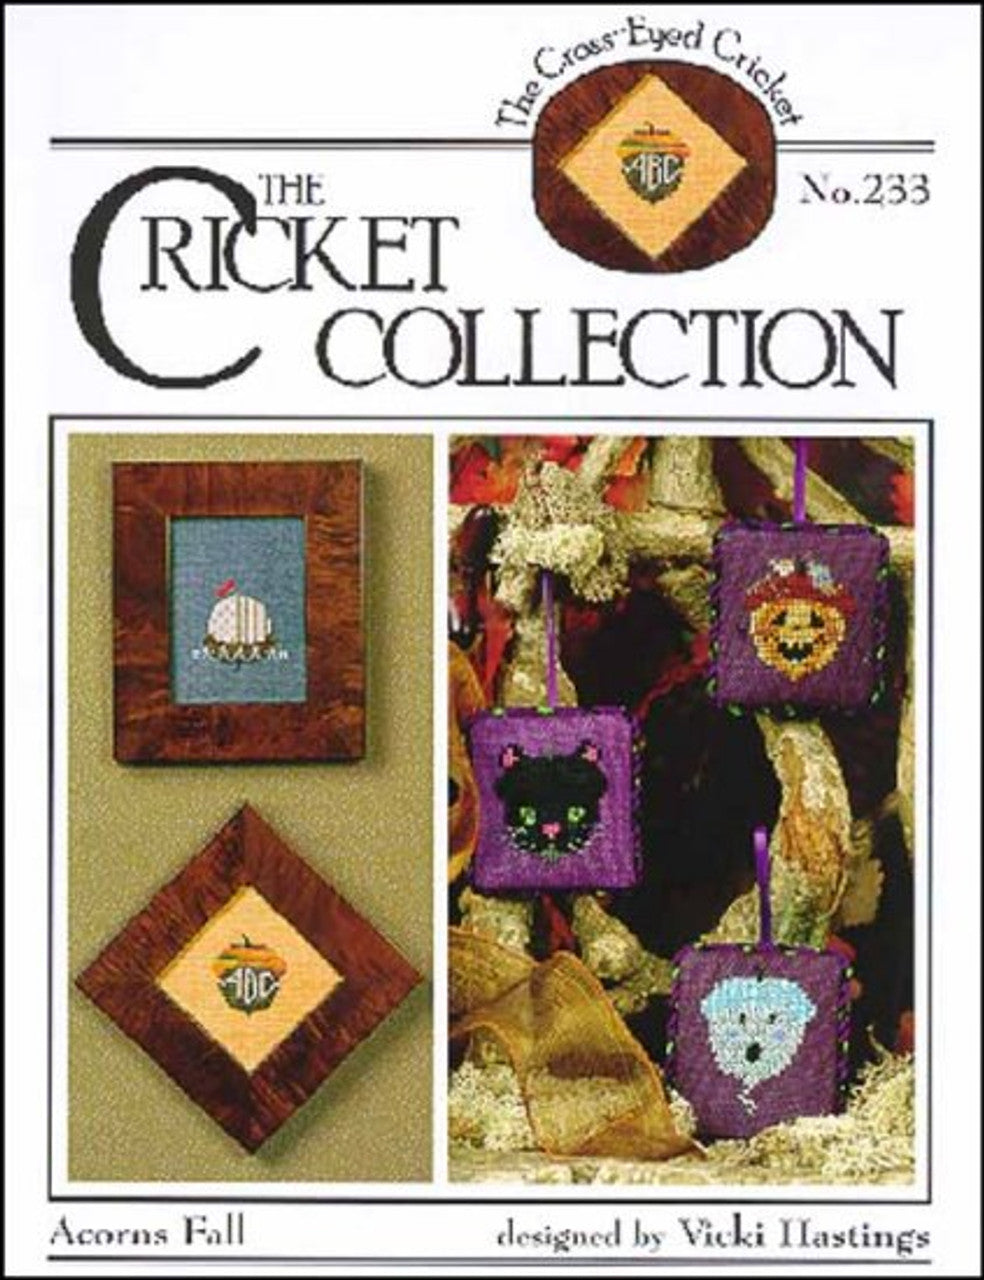 Acorns Fall By The Cricket Collection